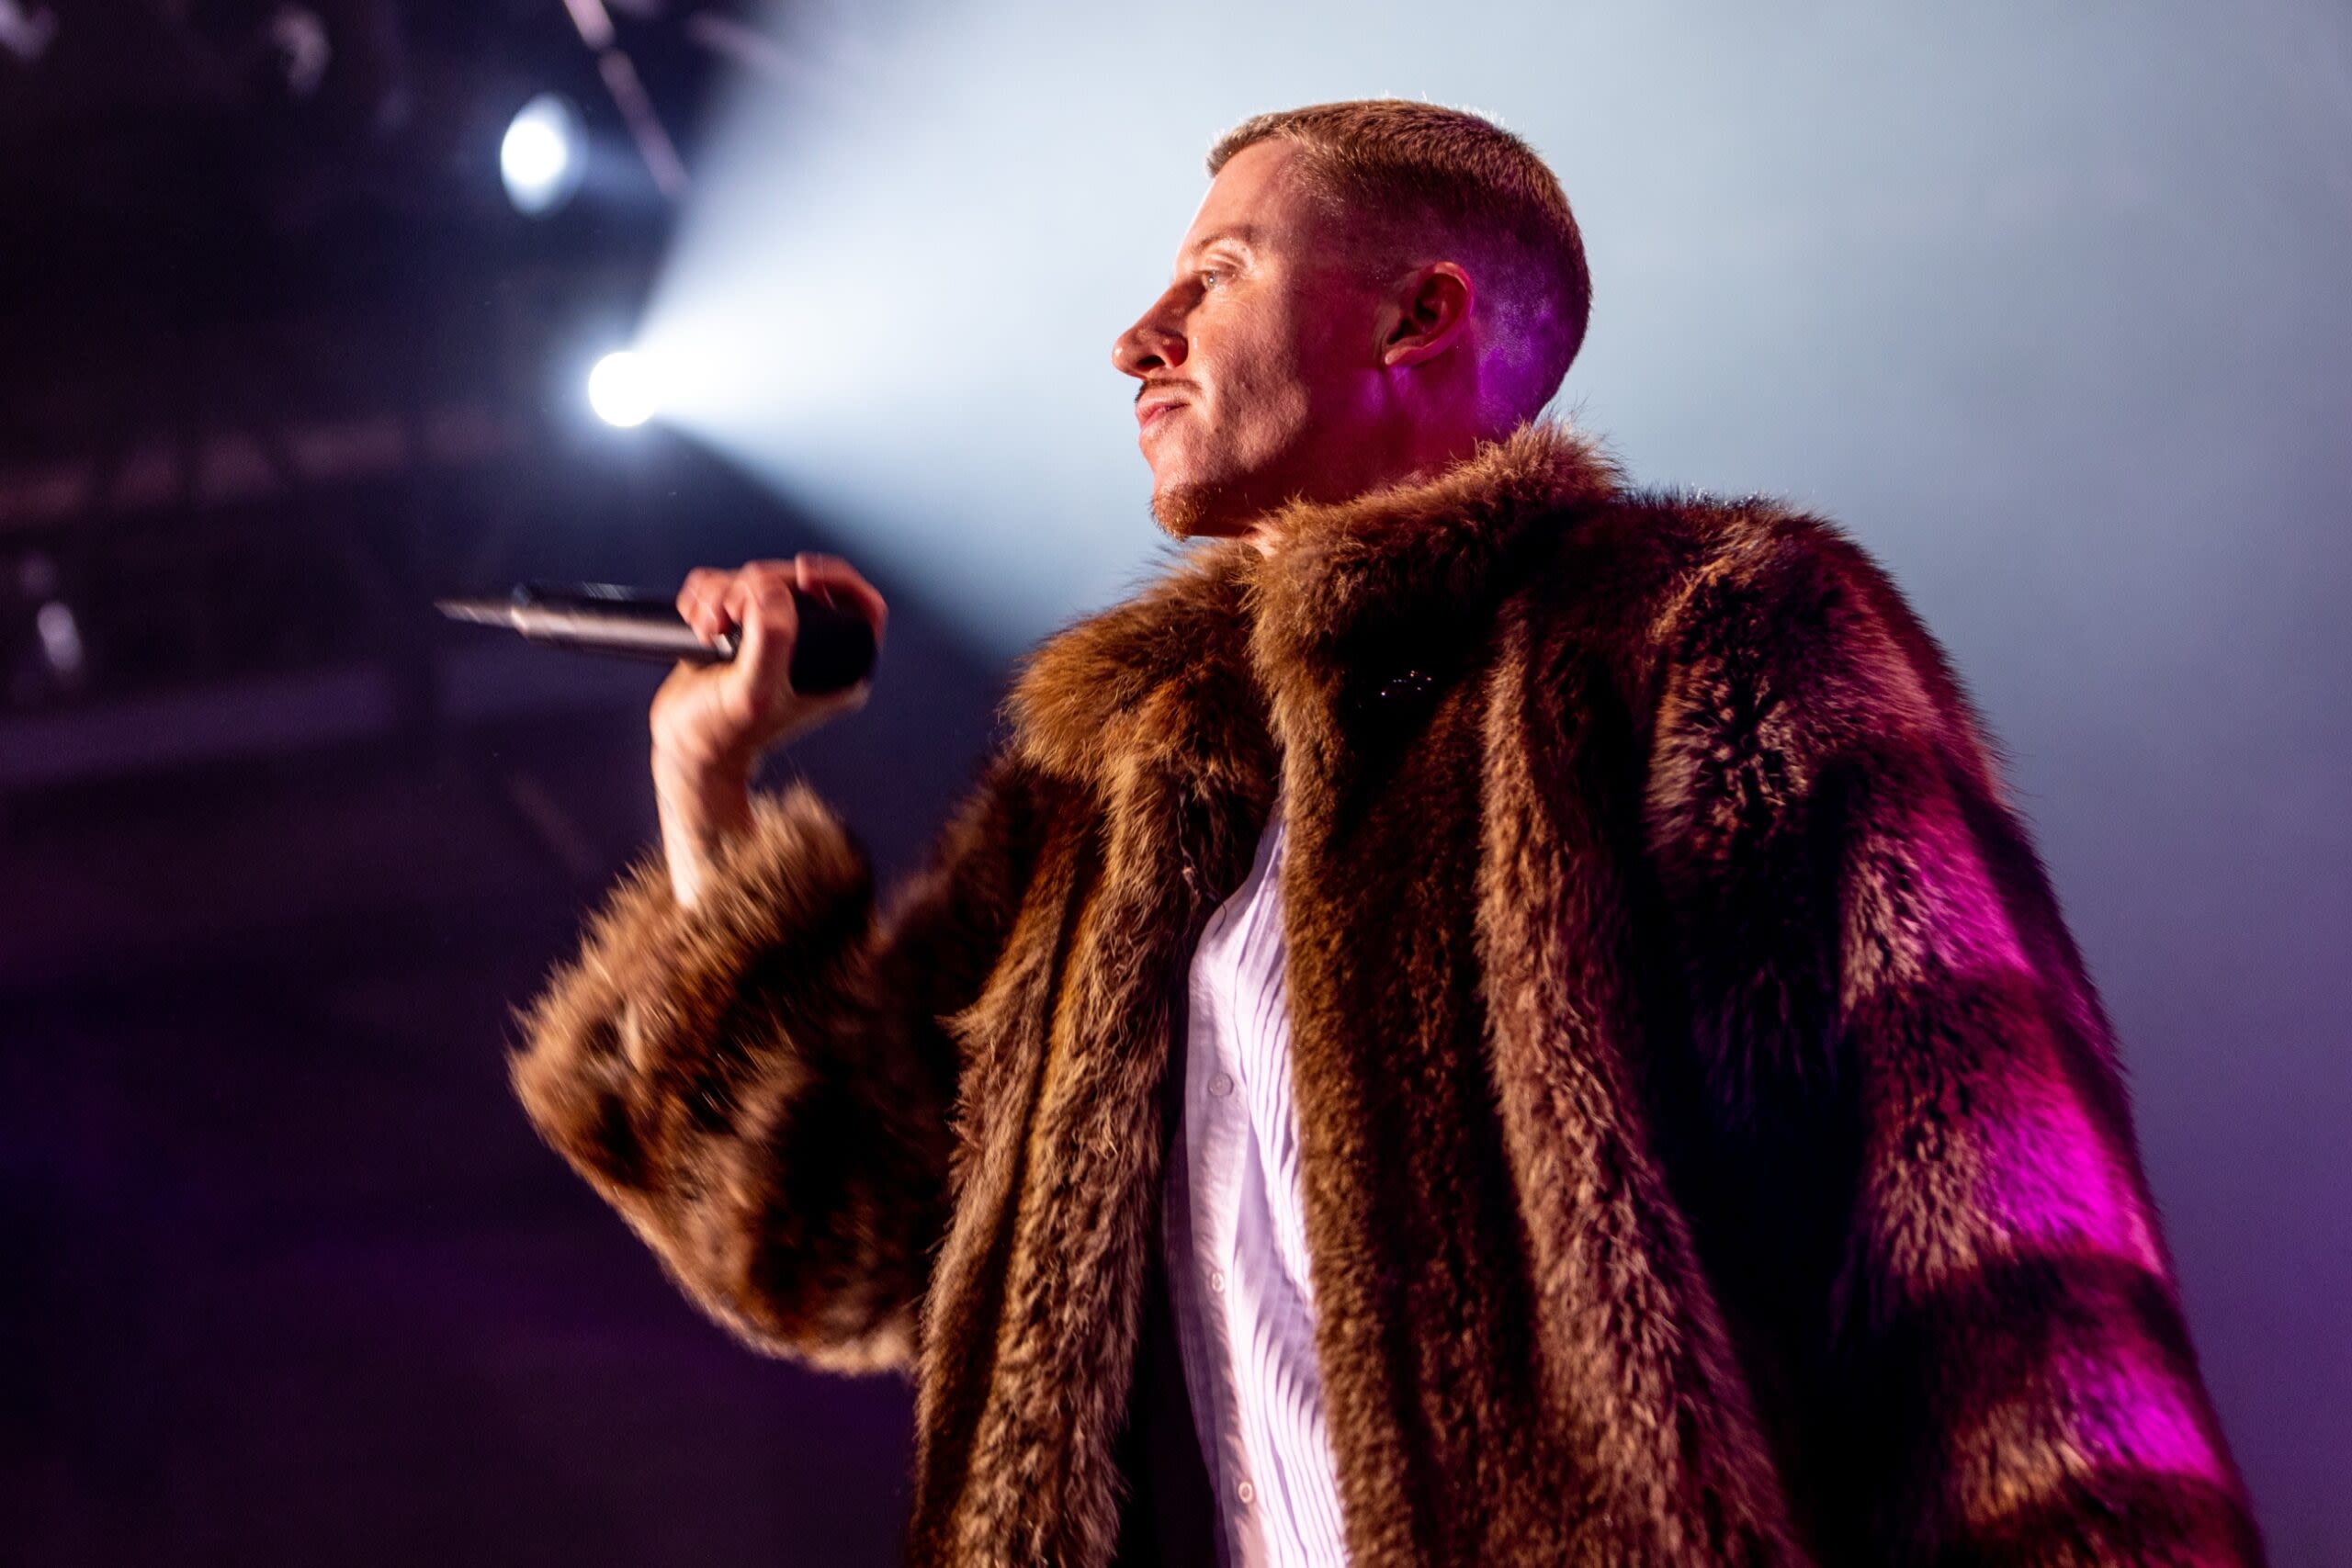 (Watch) In Germany, Macklemore Exploits the Holocaust to Rationalize His Antisemitism - Showbiz411